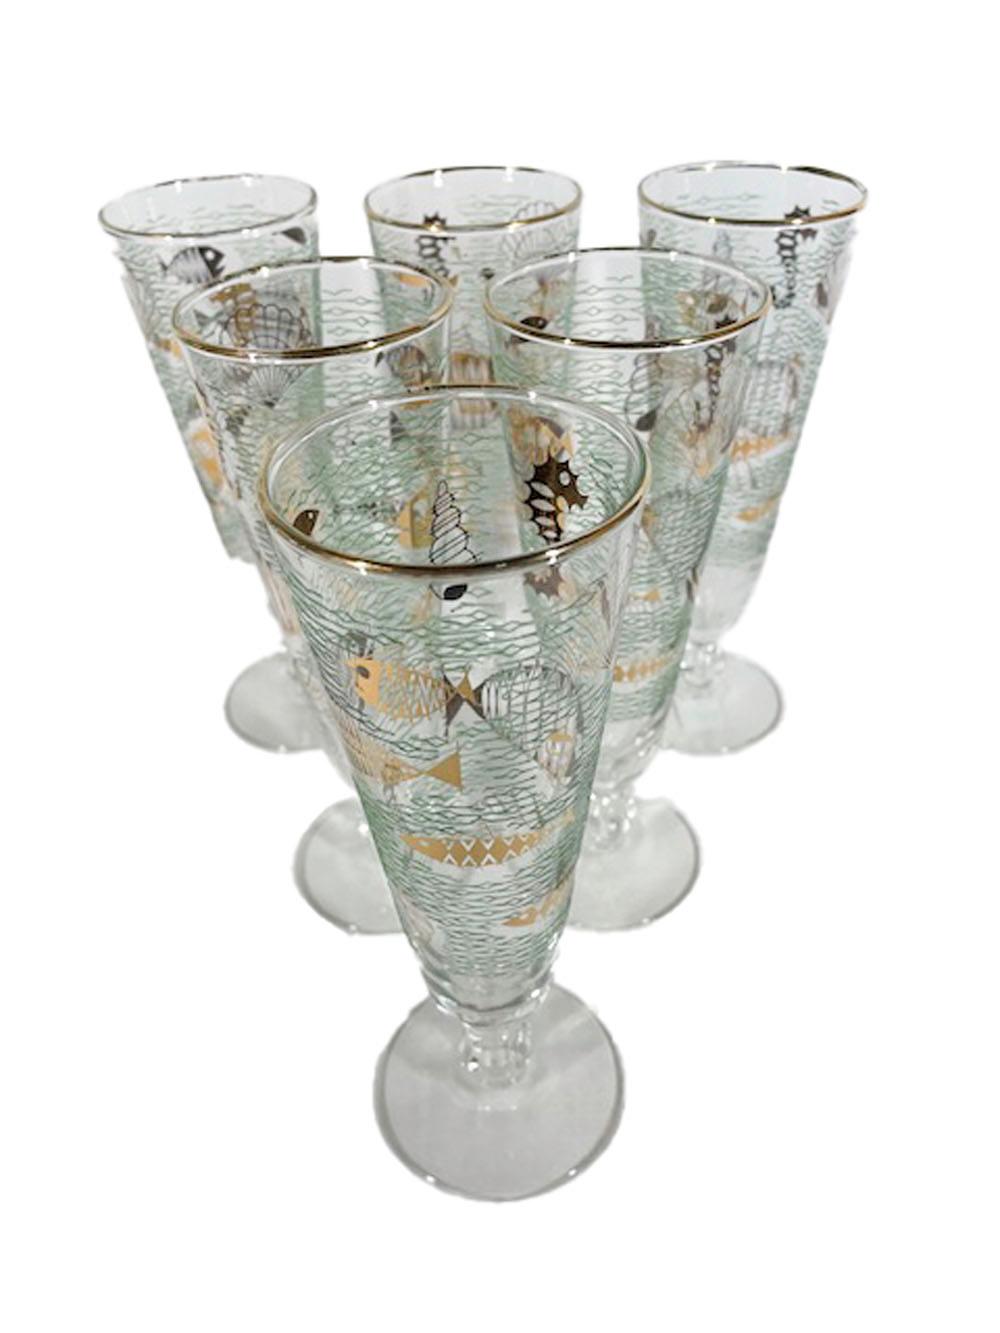 Six footed pilsner glasses with a lobed ball stem decorated with 22k gold Atomic style fish and other marine life against a ground of waves in raised translucent green enamel. Made by Libbey glass and called 'Marine Life' this pattern was